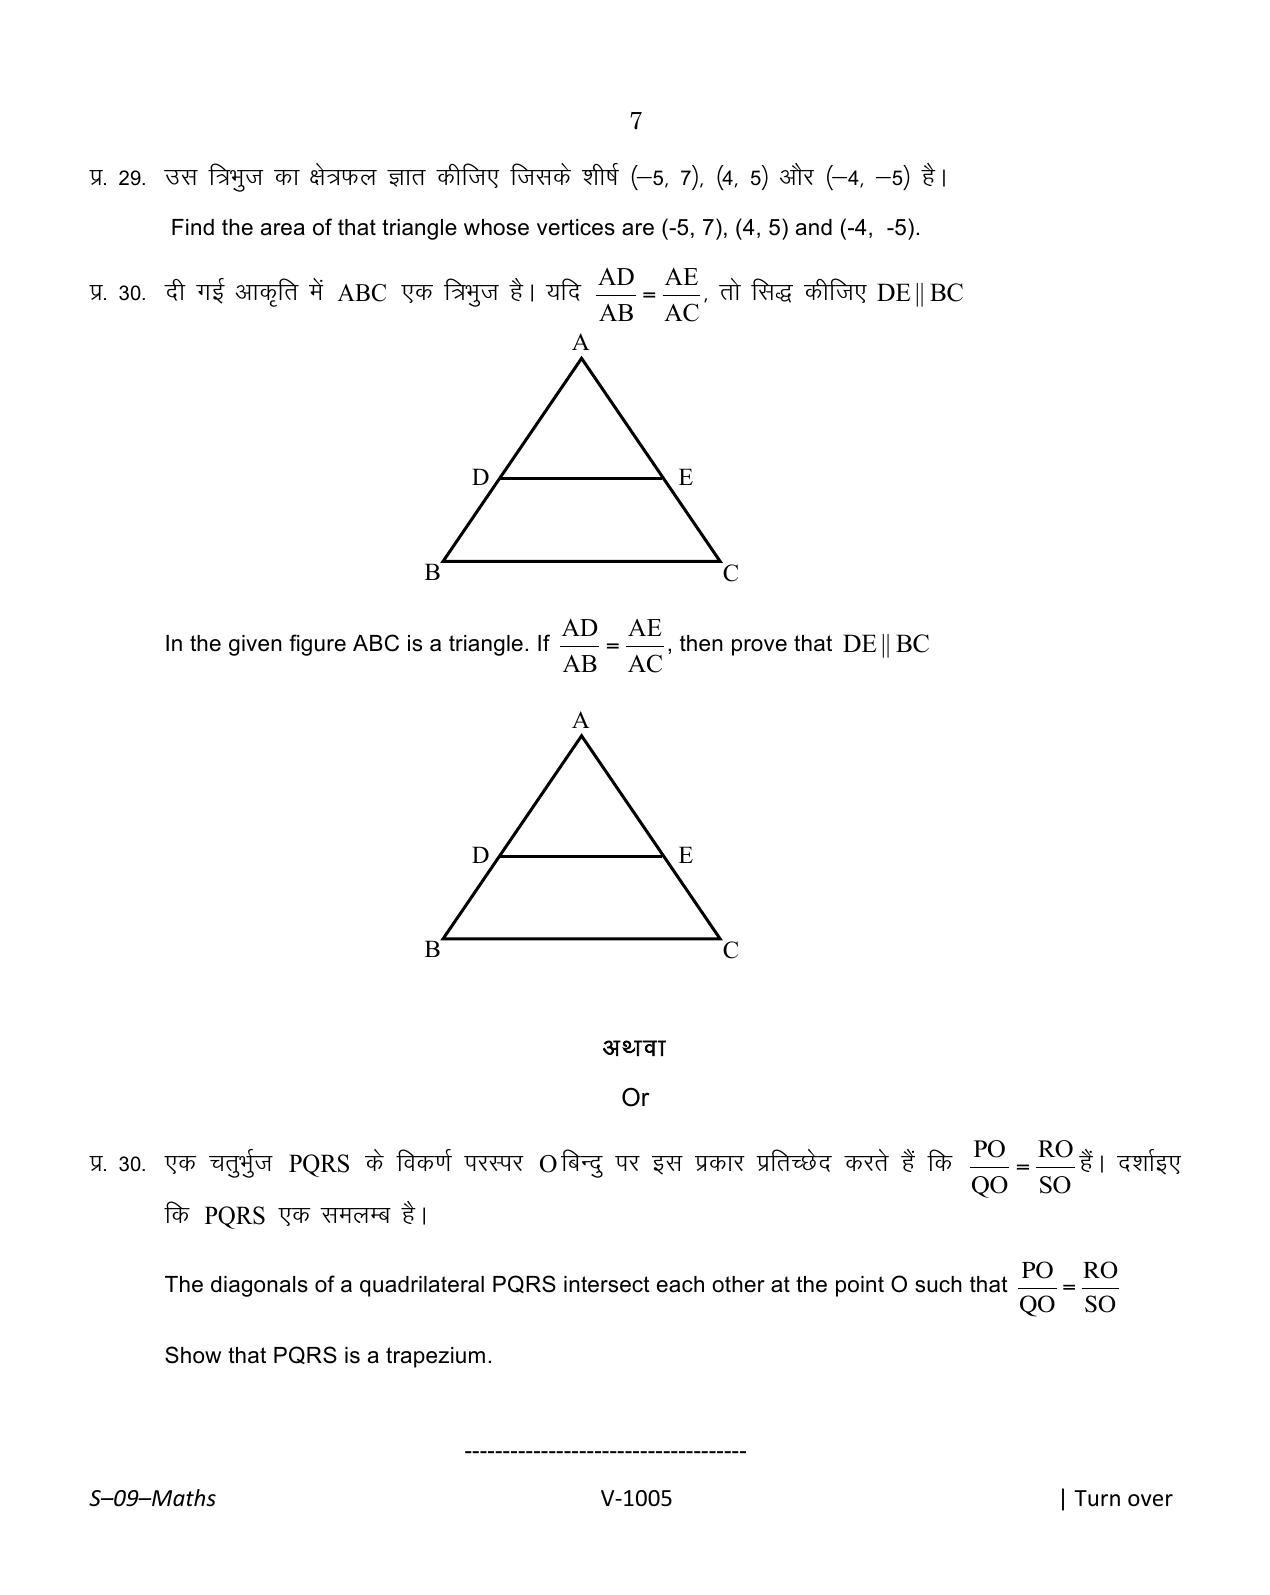 RBSE Class 10 Mathematics 2016 Question Paper - Page 7